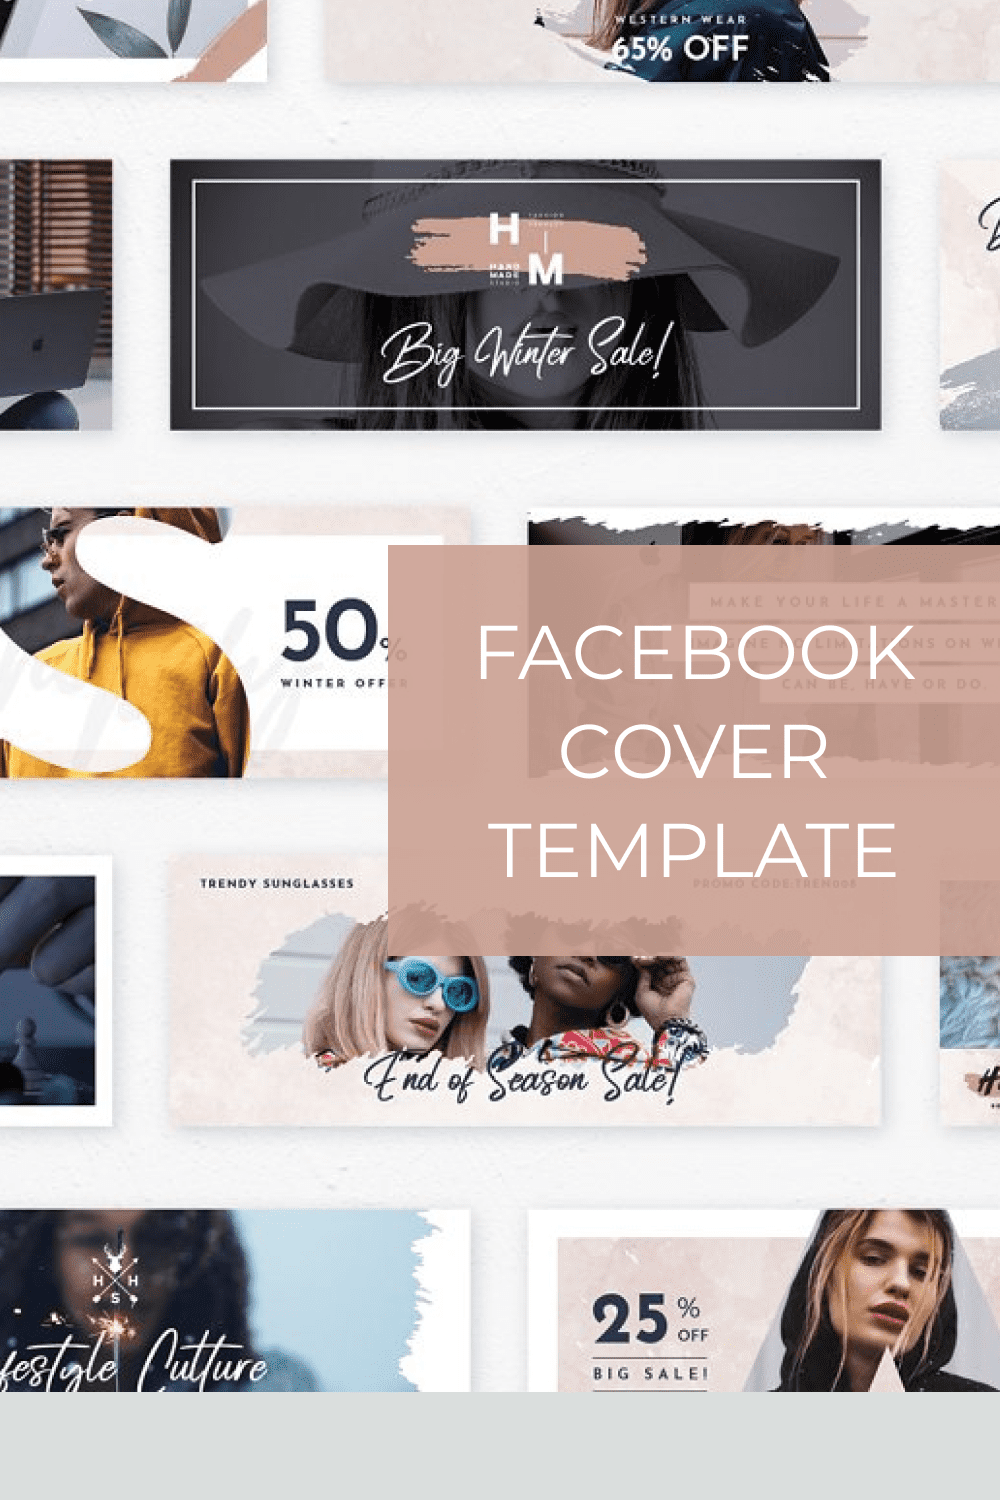 Nice colors and soft lines for your Facebook projects.